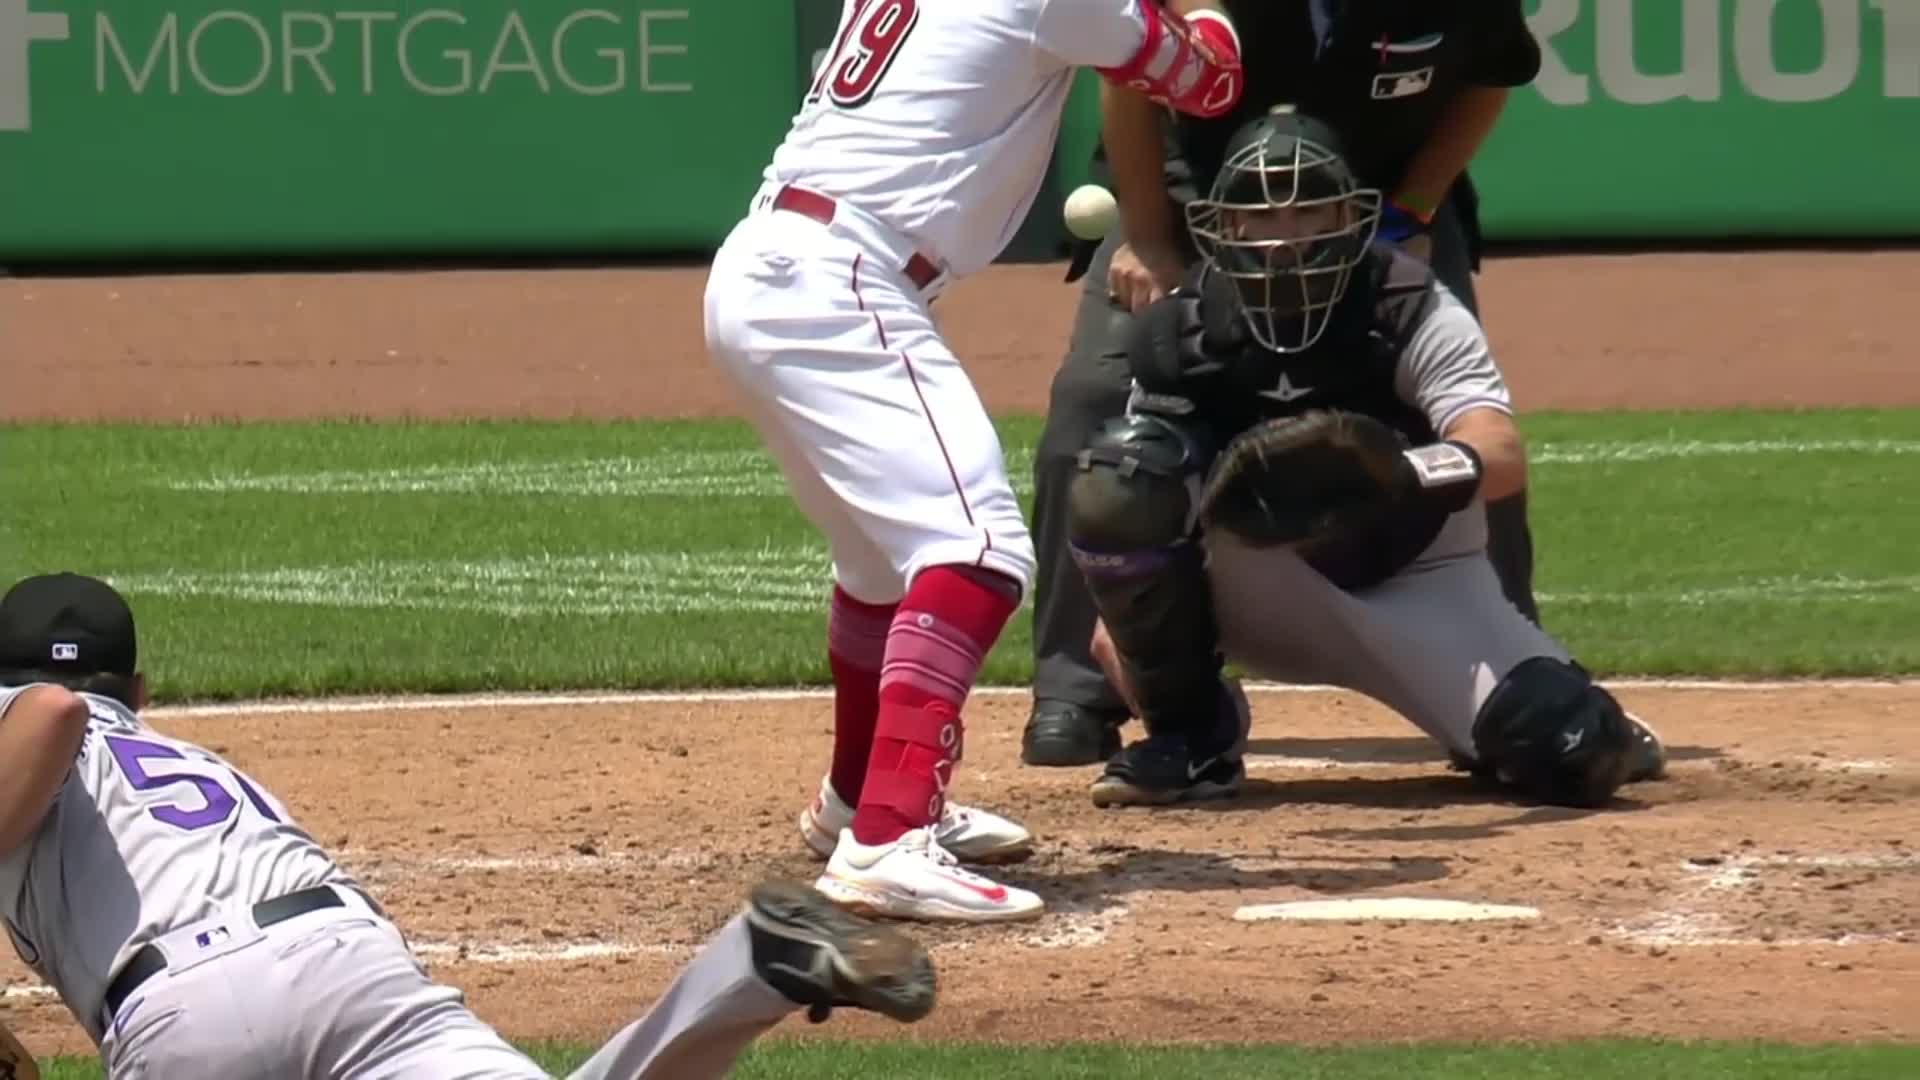 Highlight Joey Votto is hit by a pitch that was likely a strike image